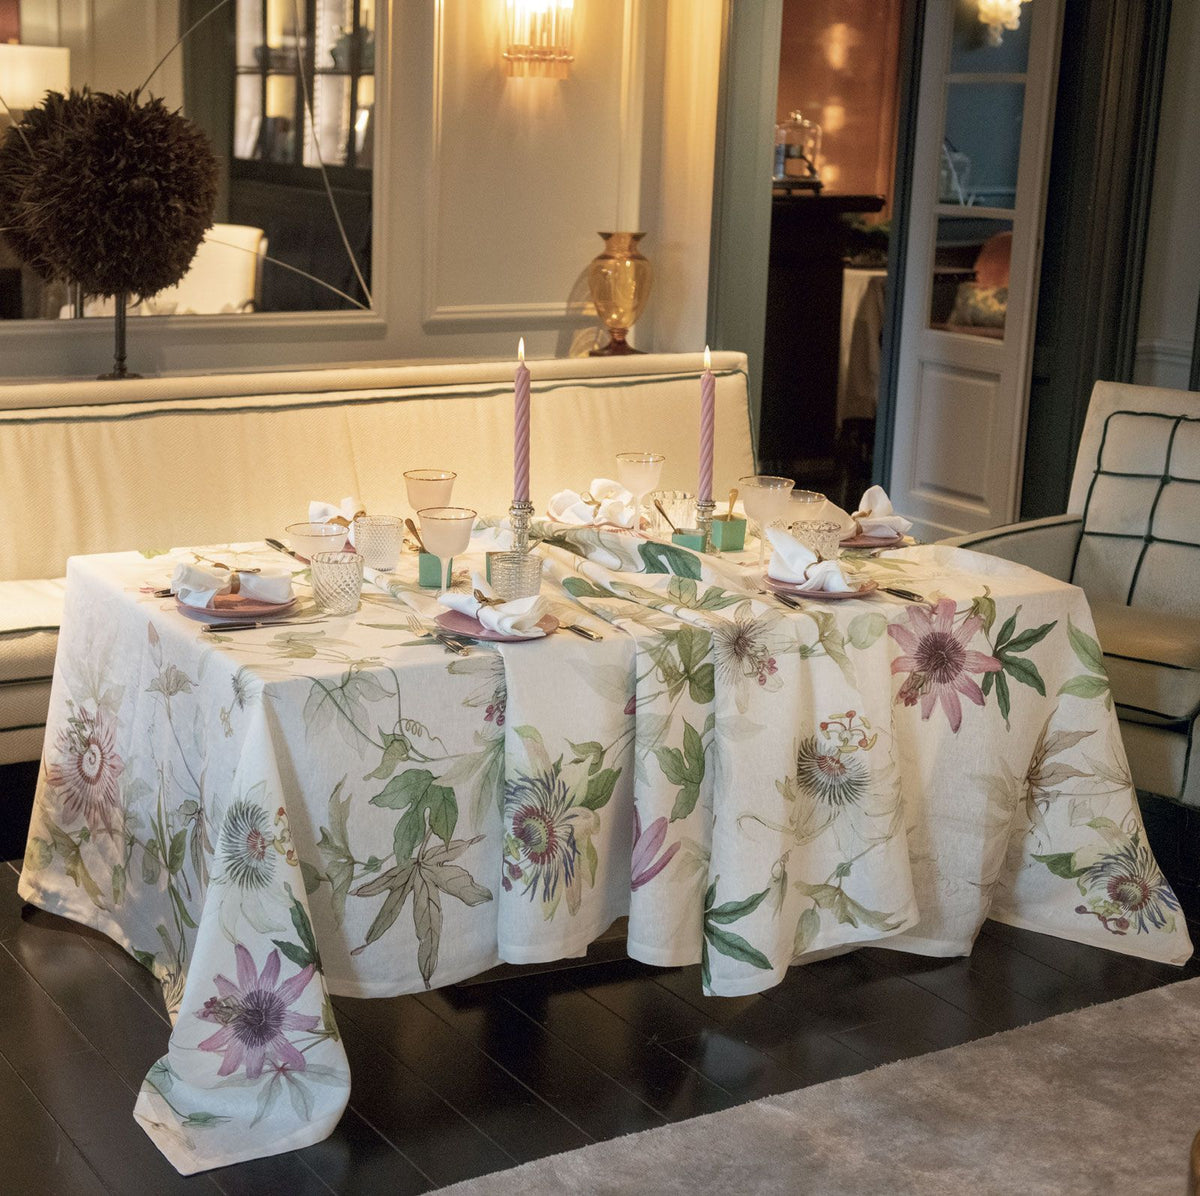 A dining room table with a Passionflower Linen Tablecloth adorned with passionflowers by TTT.